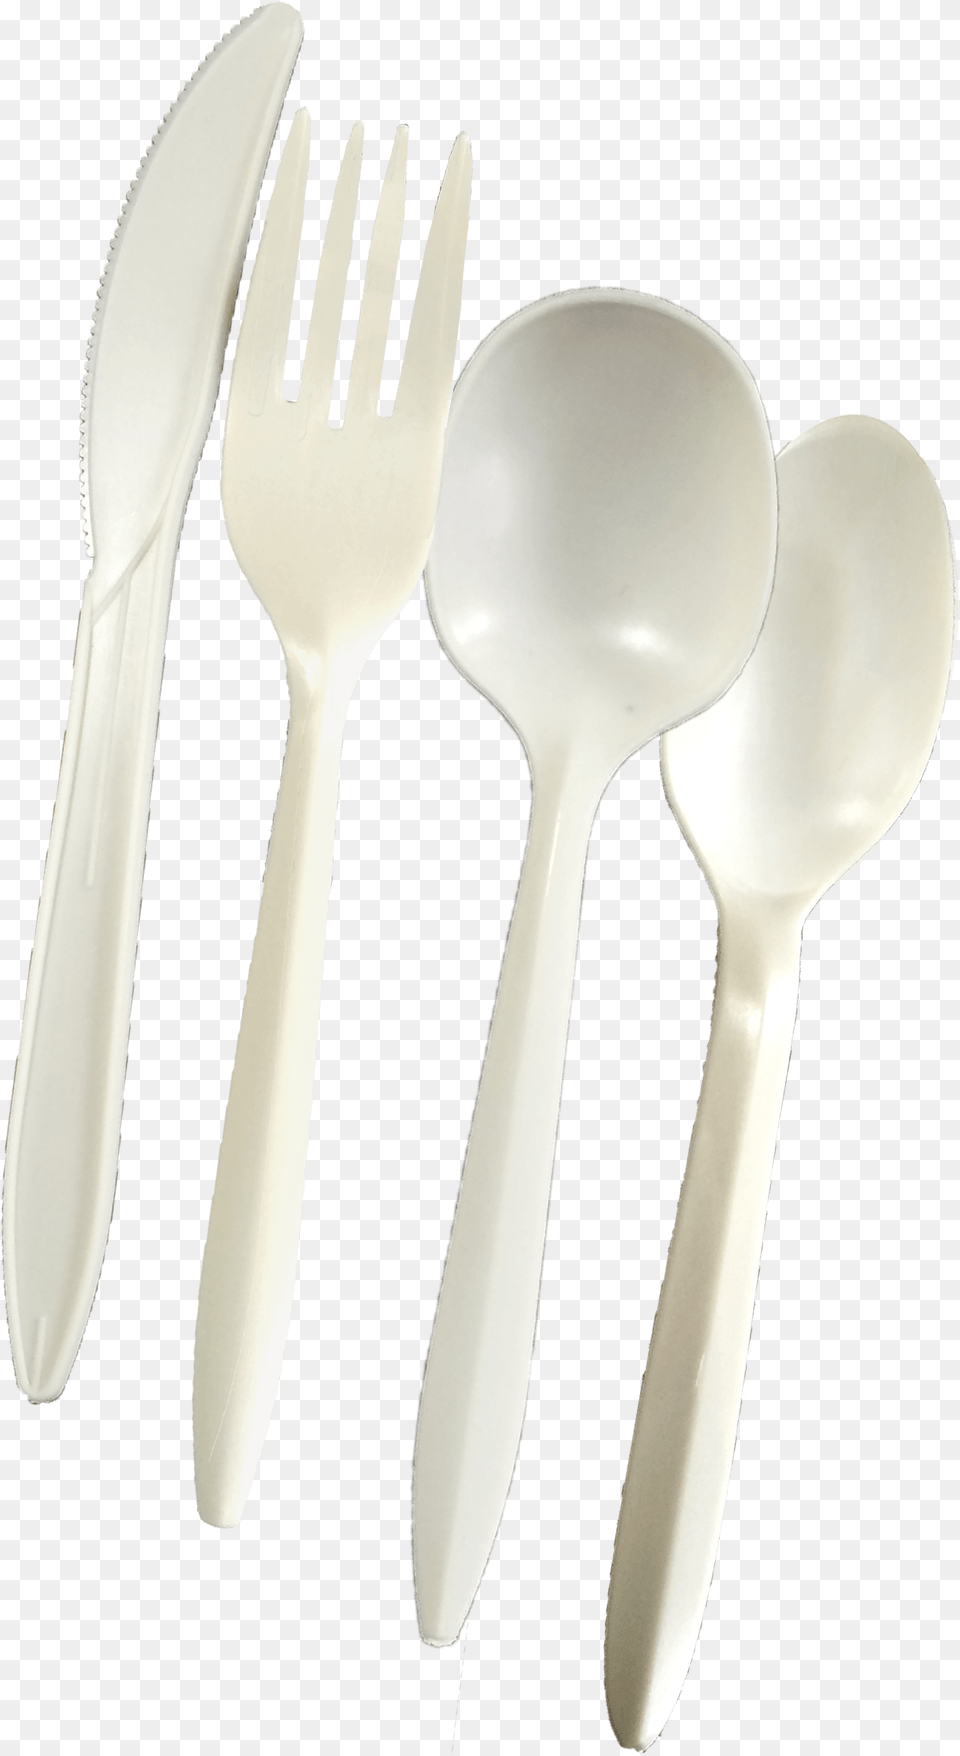 Line Of Disposable Retail Knife, Cutlery, Fork, Spoon Png Image